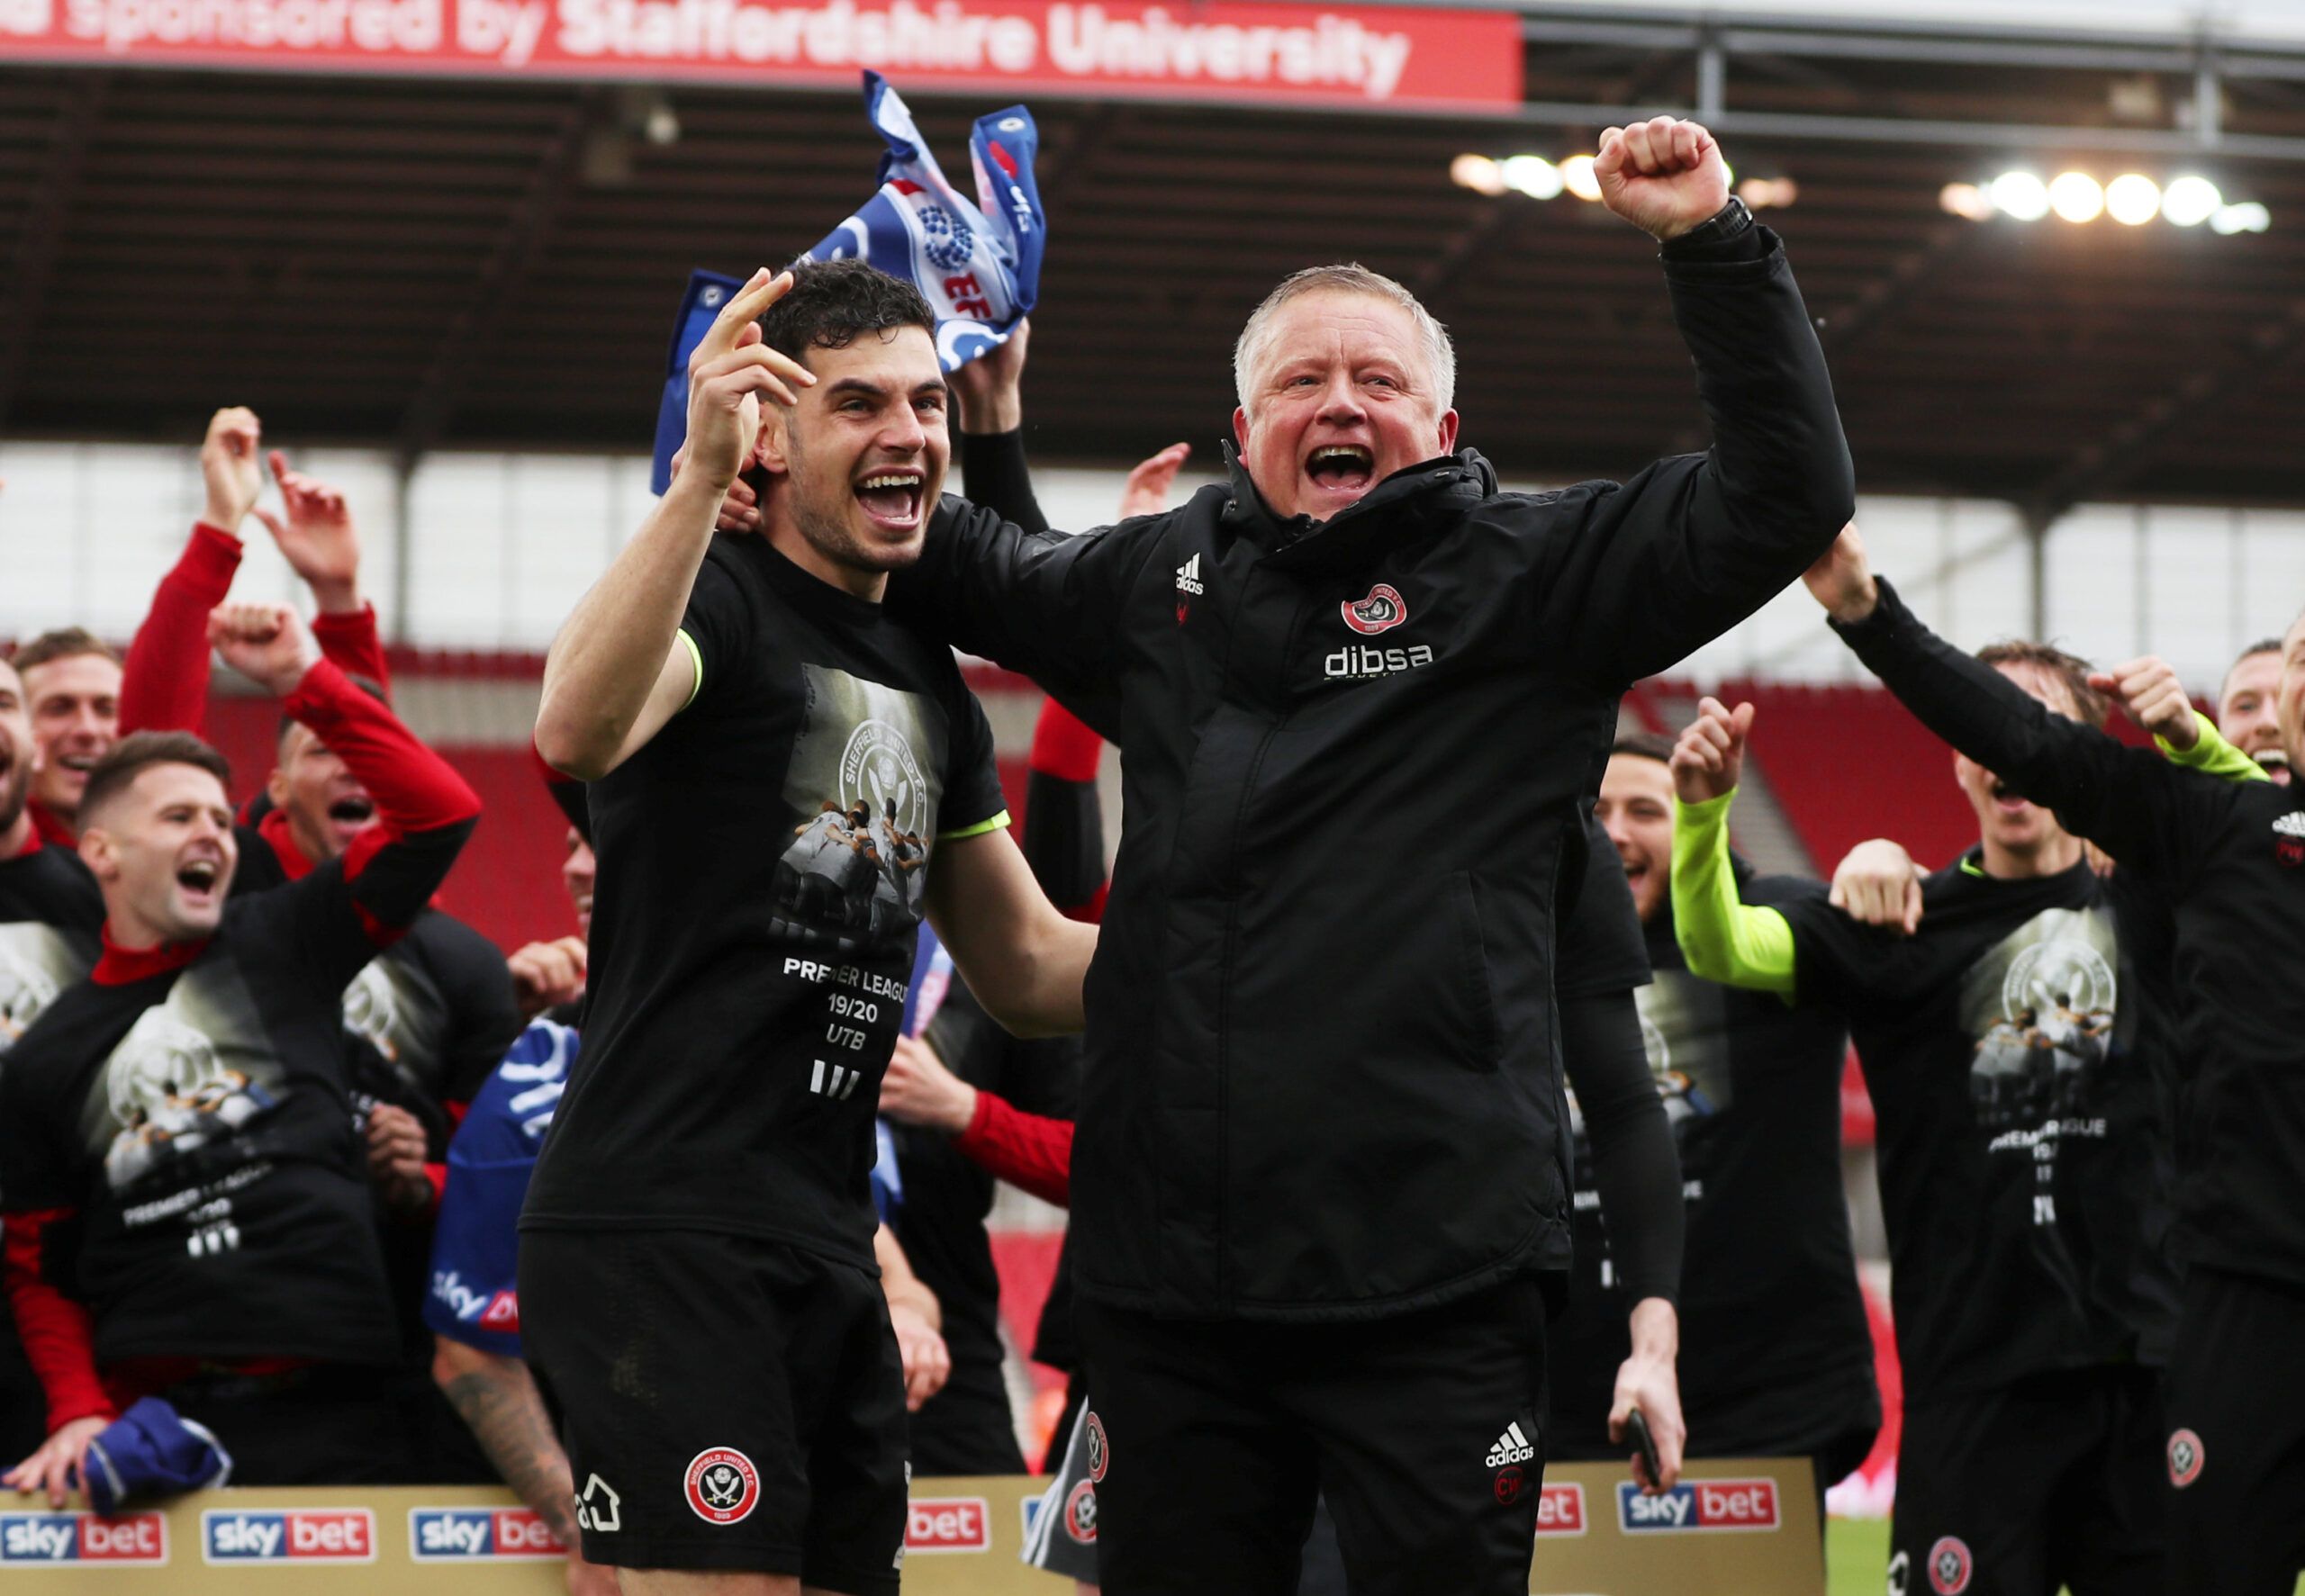 Soccer Football - Championship - Stoke City v Sheffield United - bet365 Stadium, Stoke-on-Trent, Britain - May 5, 2019   Sheffield United manager Chris Wilder celebrates promotion after the match with the players     Action Images via Reuters/Lee Smith    EDITORIAL USE ONLY. No use with unauthorized audio, video, data, fixture lists, club/league logos or 